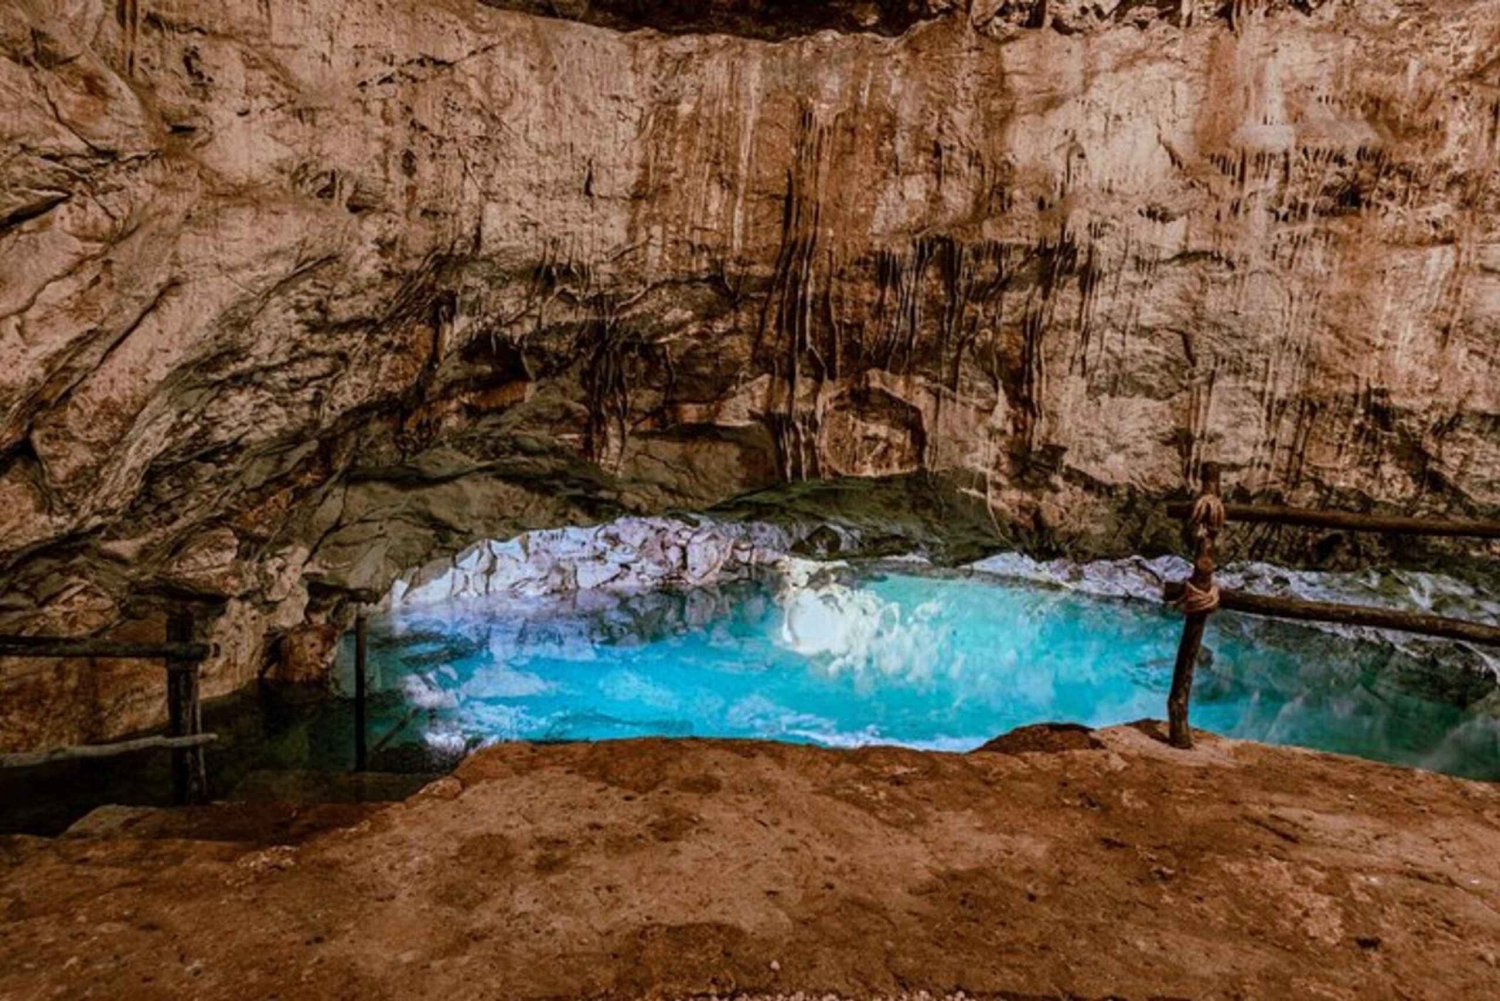 From Merida: Explore all the Cenotes of Homun Day Trip